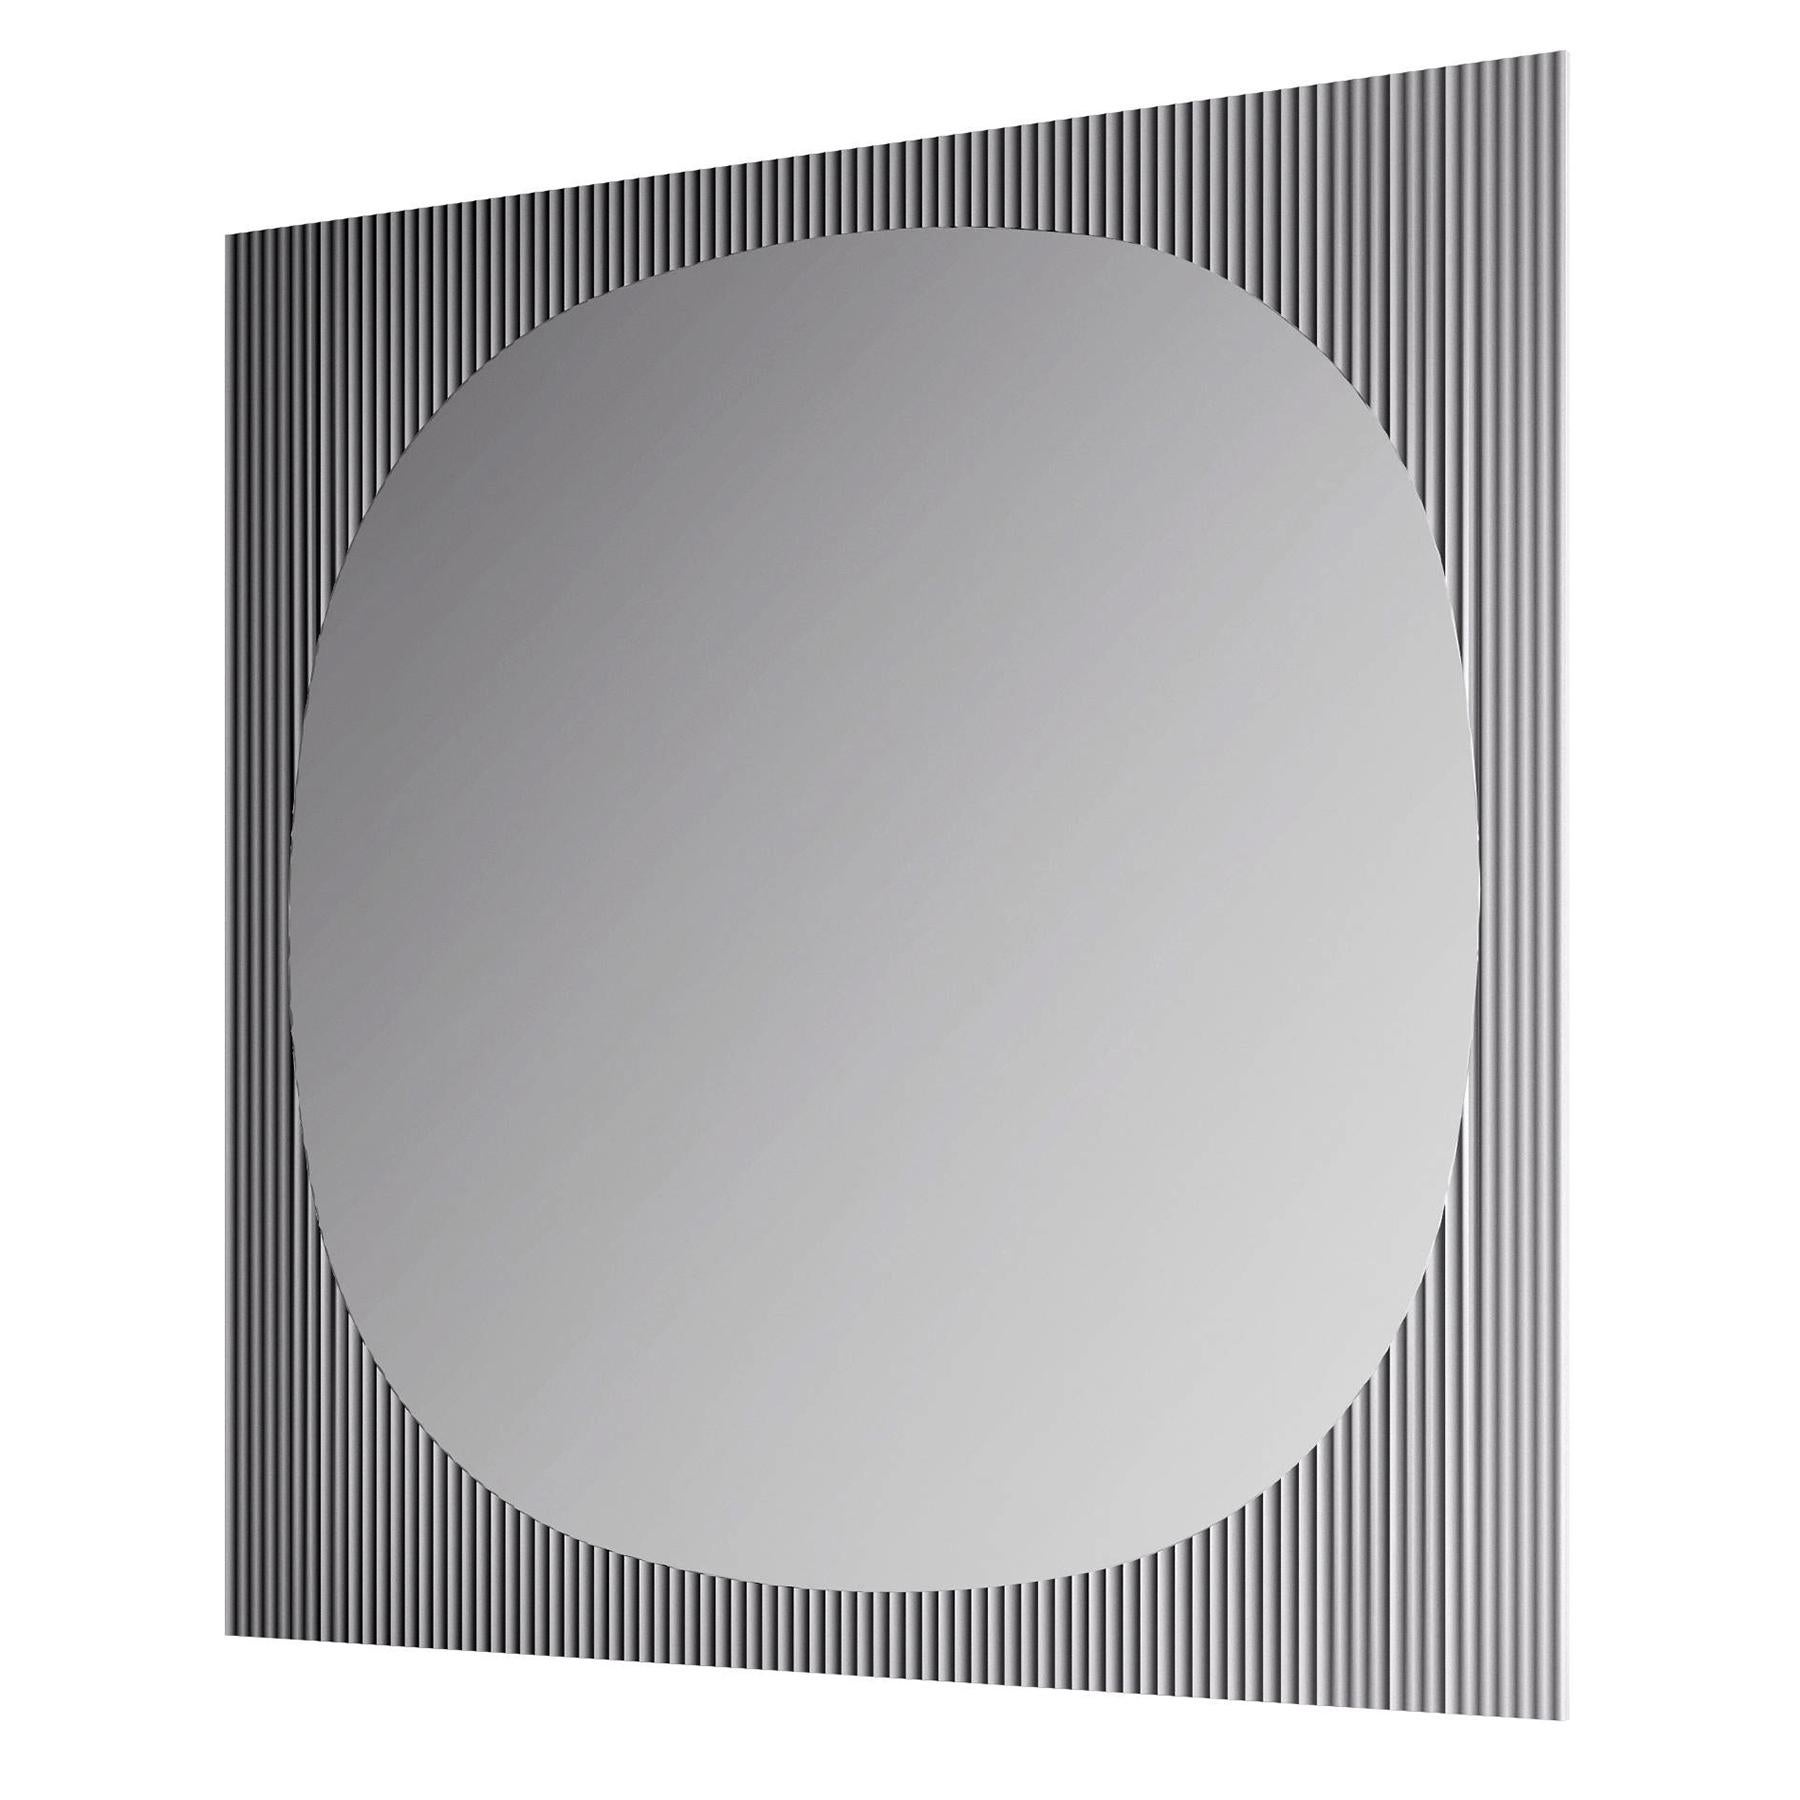 Mirror lines on square with glass and mirror glass
structure frame made by joining the glass with raised
lines-like effect and a mirror.